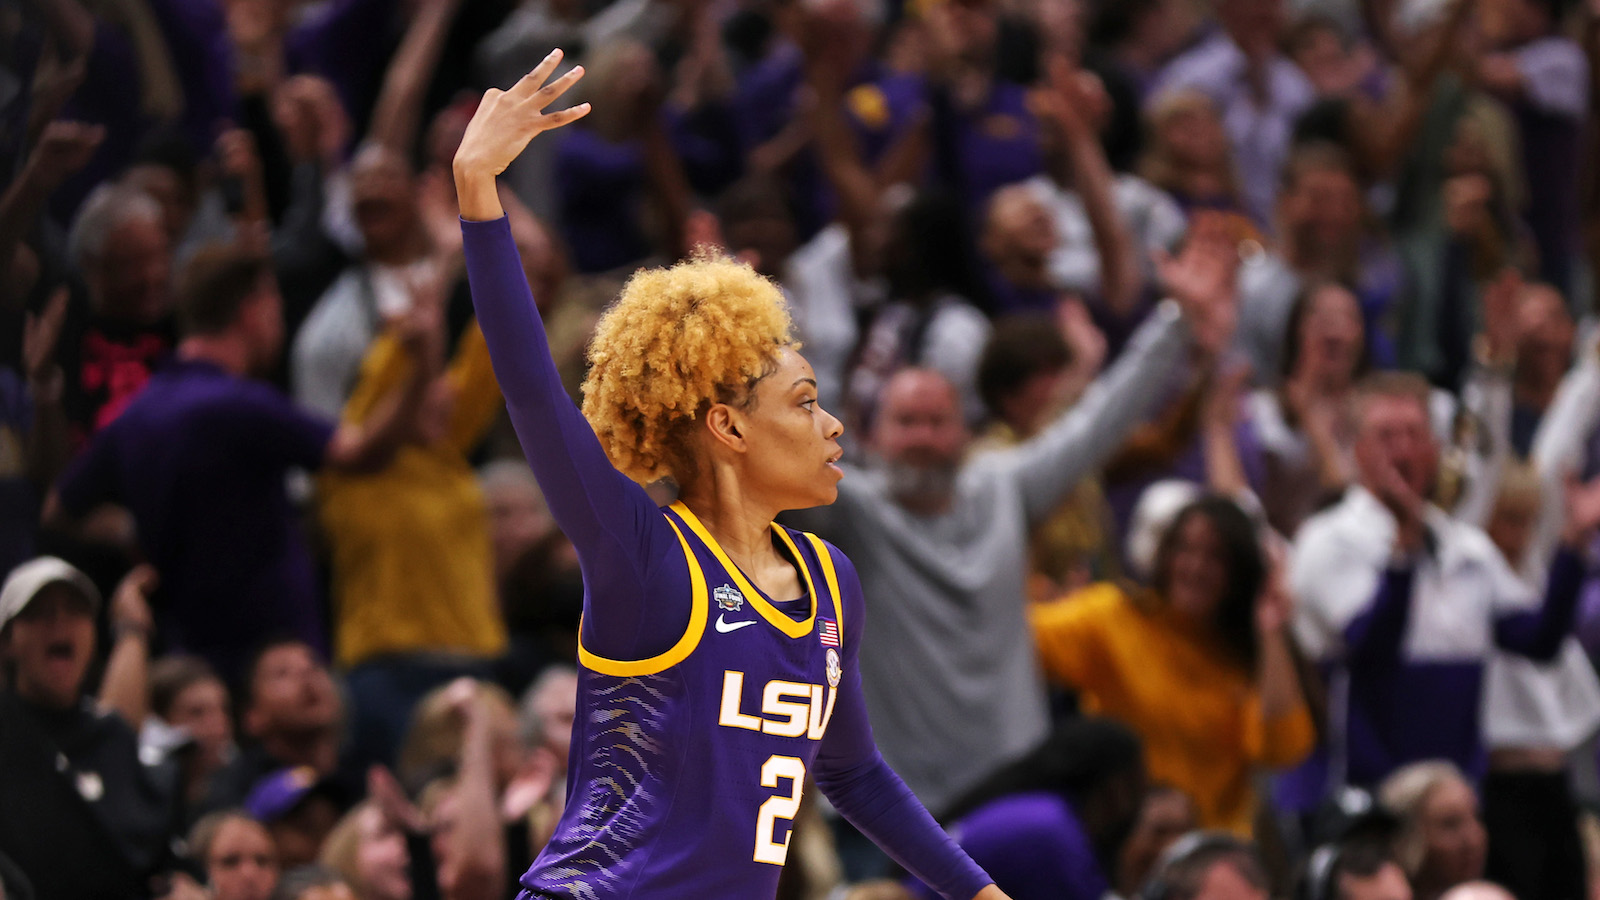 DALLAS, TEXAS - APRIL 02: Jasmine Carson #2 of the LSU Lady Tigers reacts after a three-point basket during the first half against the Iowa Hawkeyes during the 2023 NCAA Women's Basketball Tournament championship game at American Airlines Center on April 02, 2023 in Dallas, Texas.